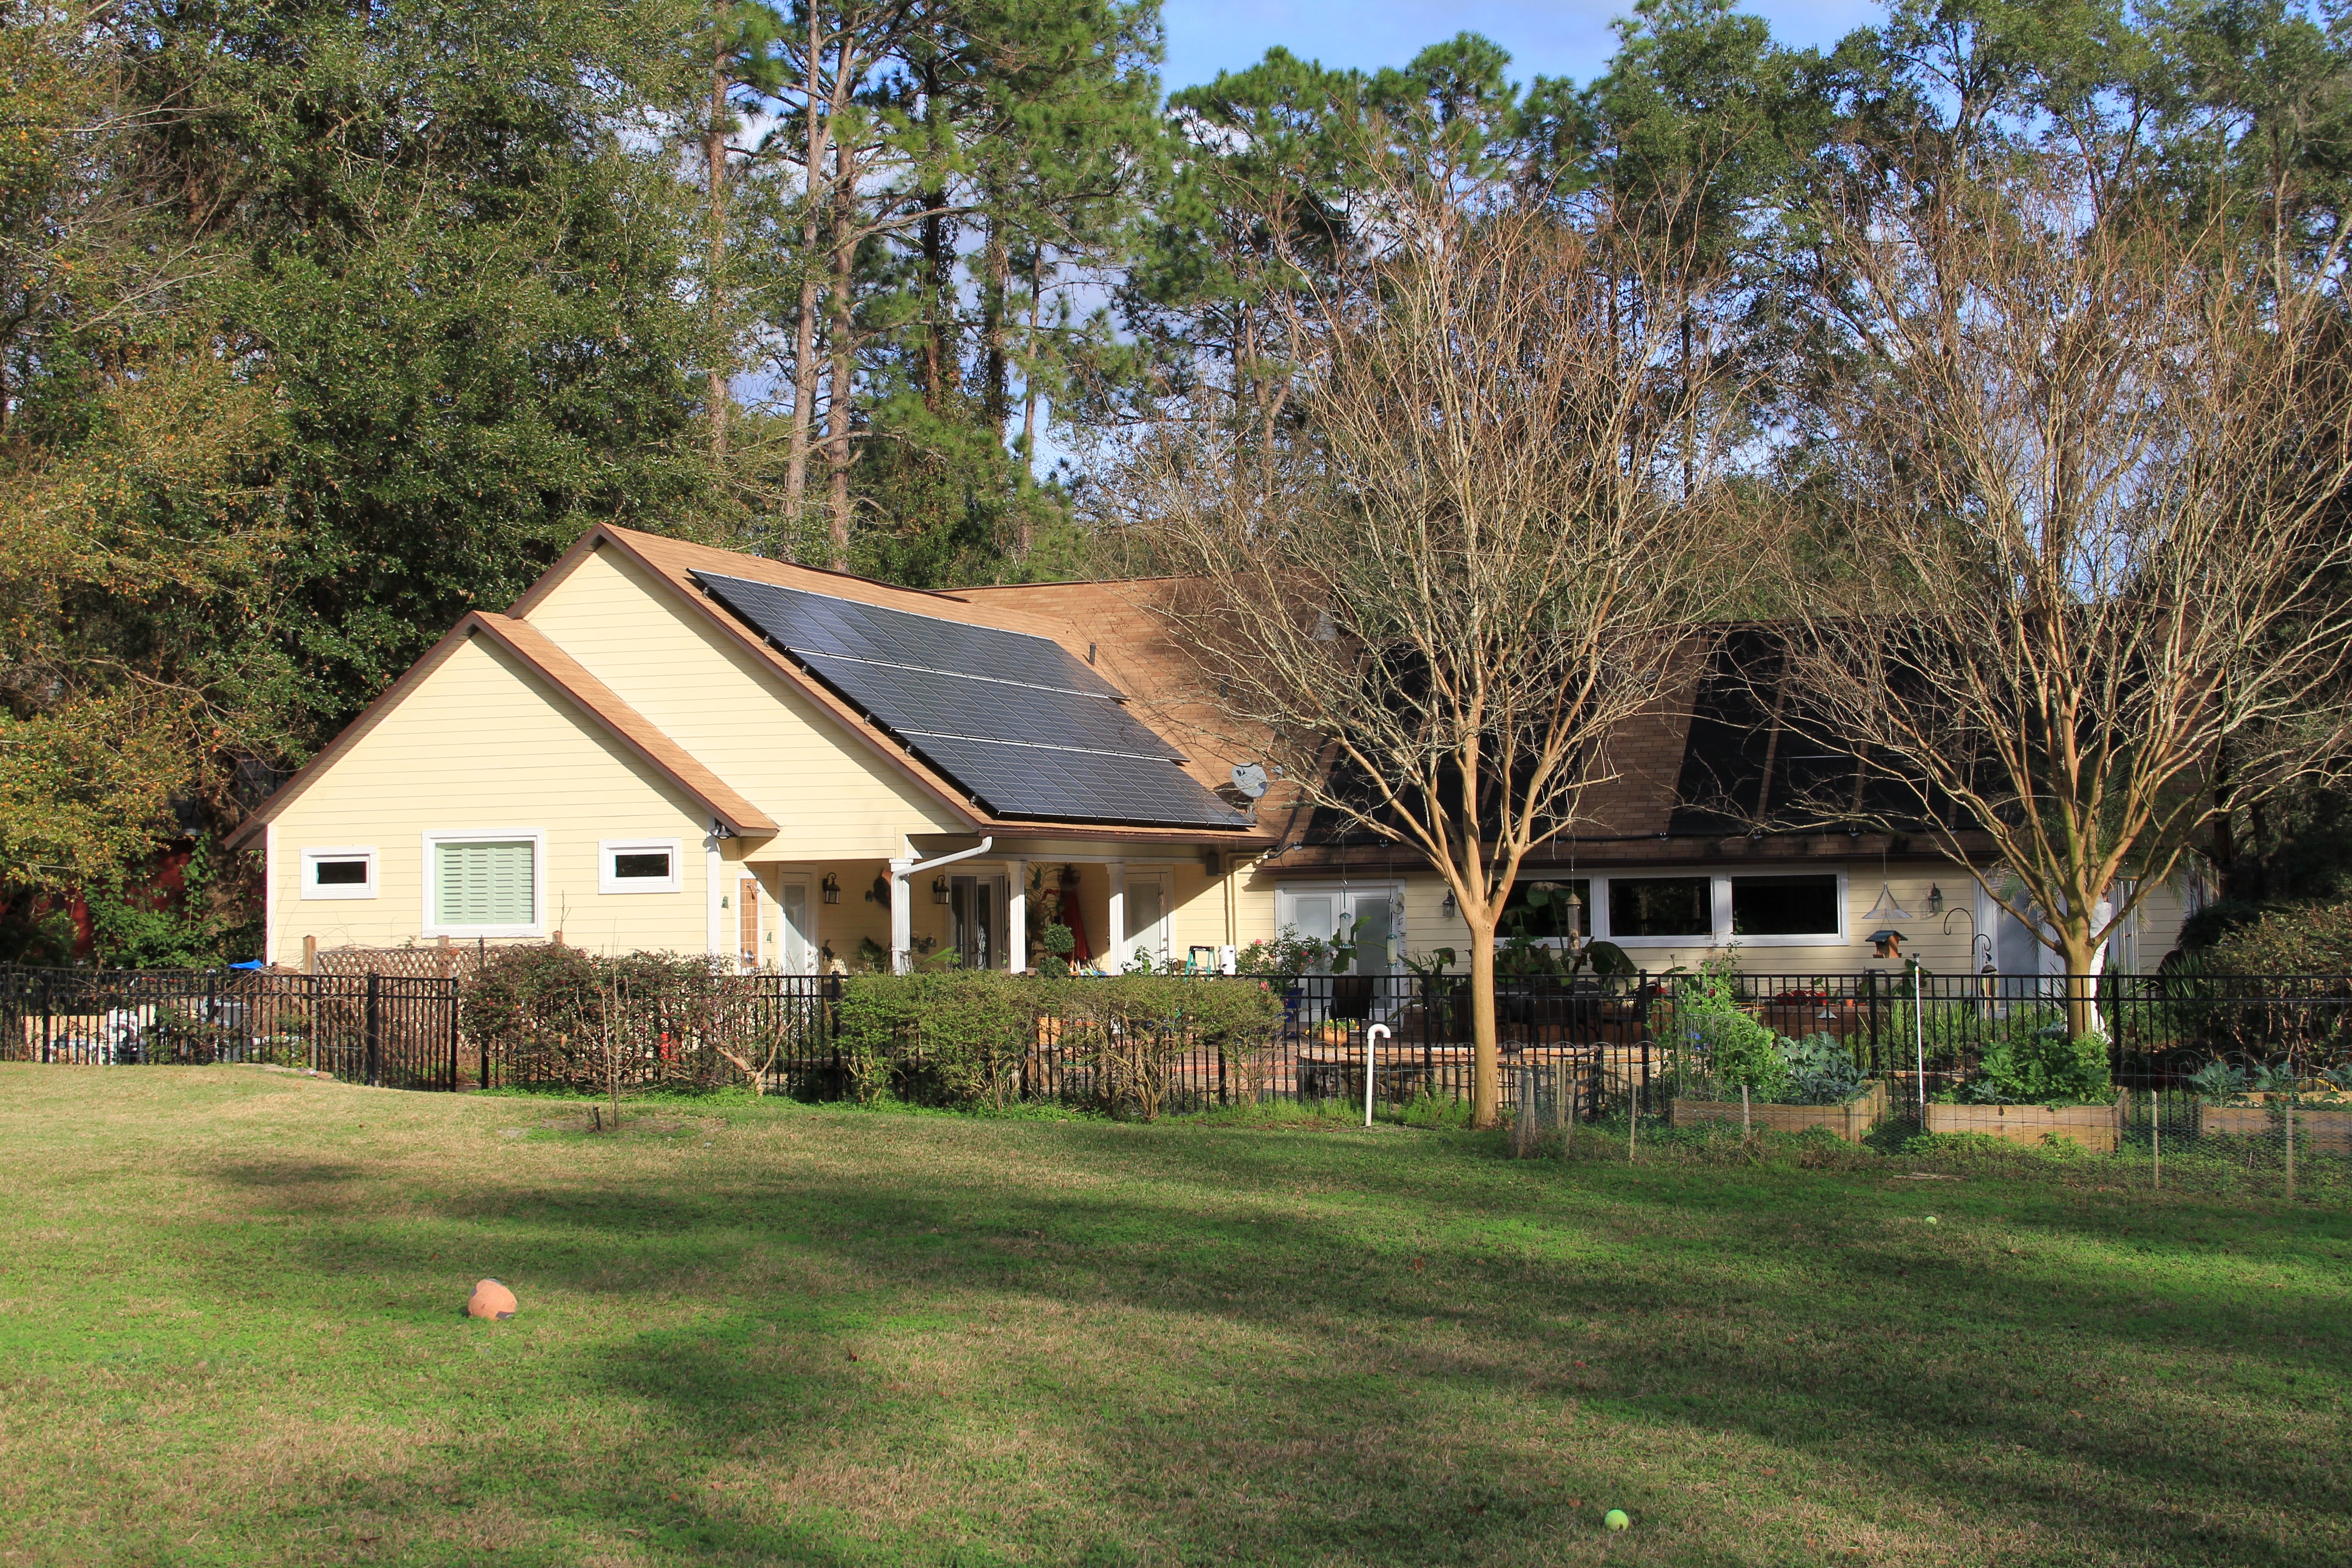 7.5 kW Roof Mounted PV System in Gainesville, FL